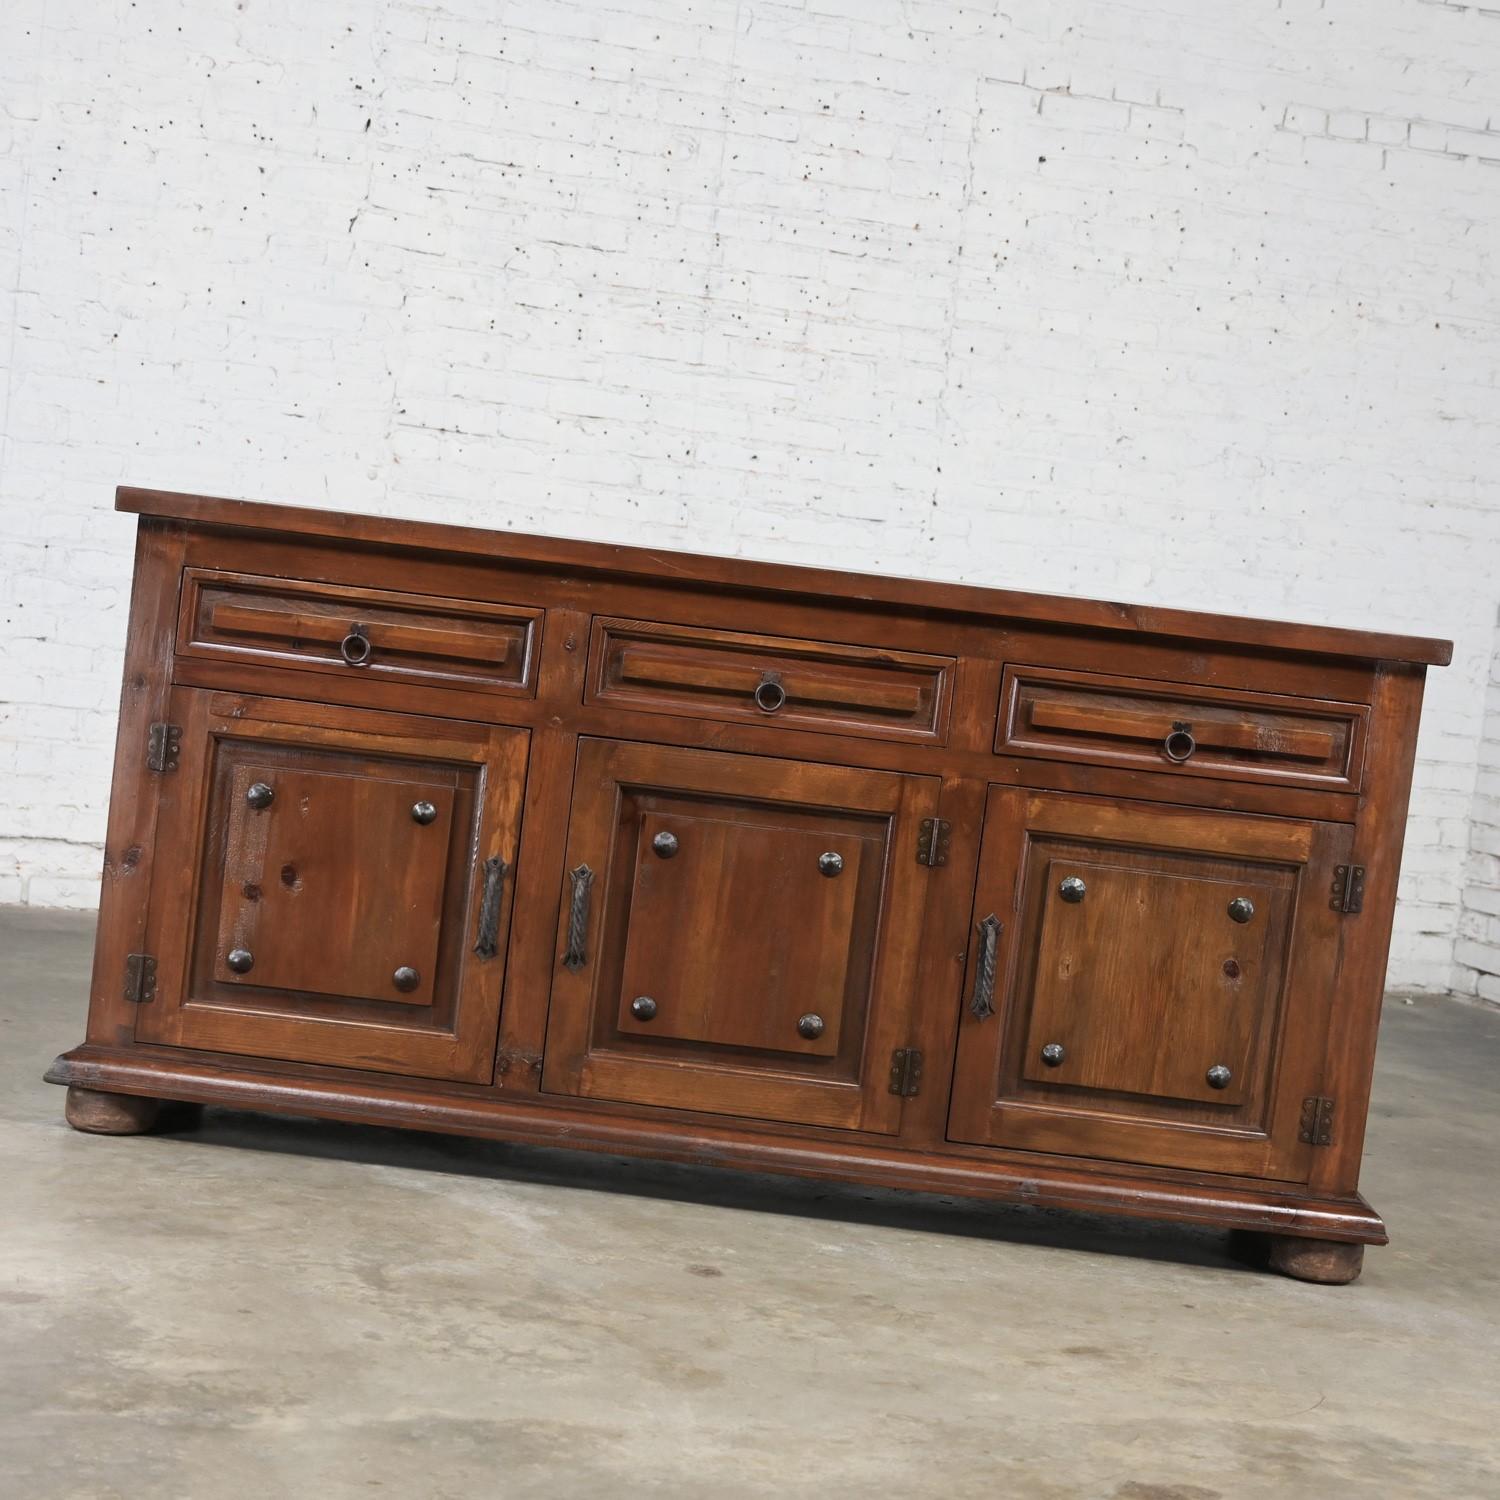 Spanish Revival Rustic Solid Pine Sideboard Style of Artes De Mexico Intern'tnl  In Good Condition For Sale In Topeka, KS